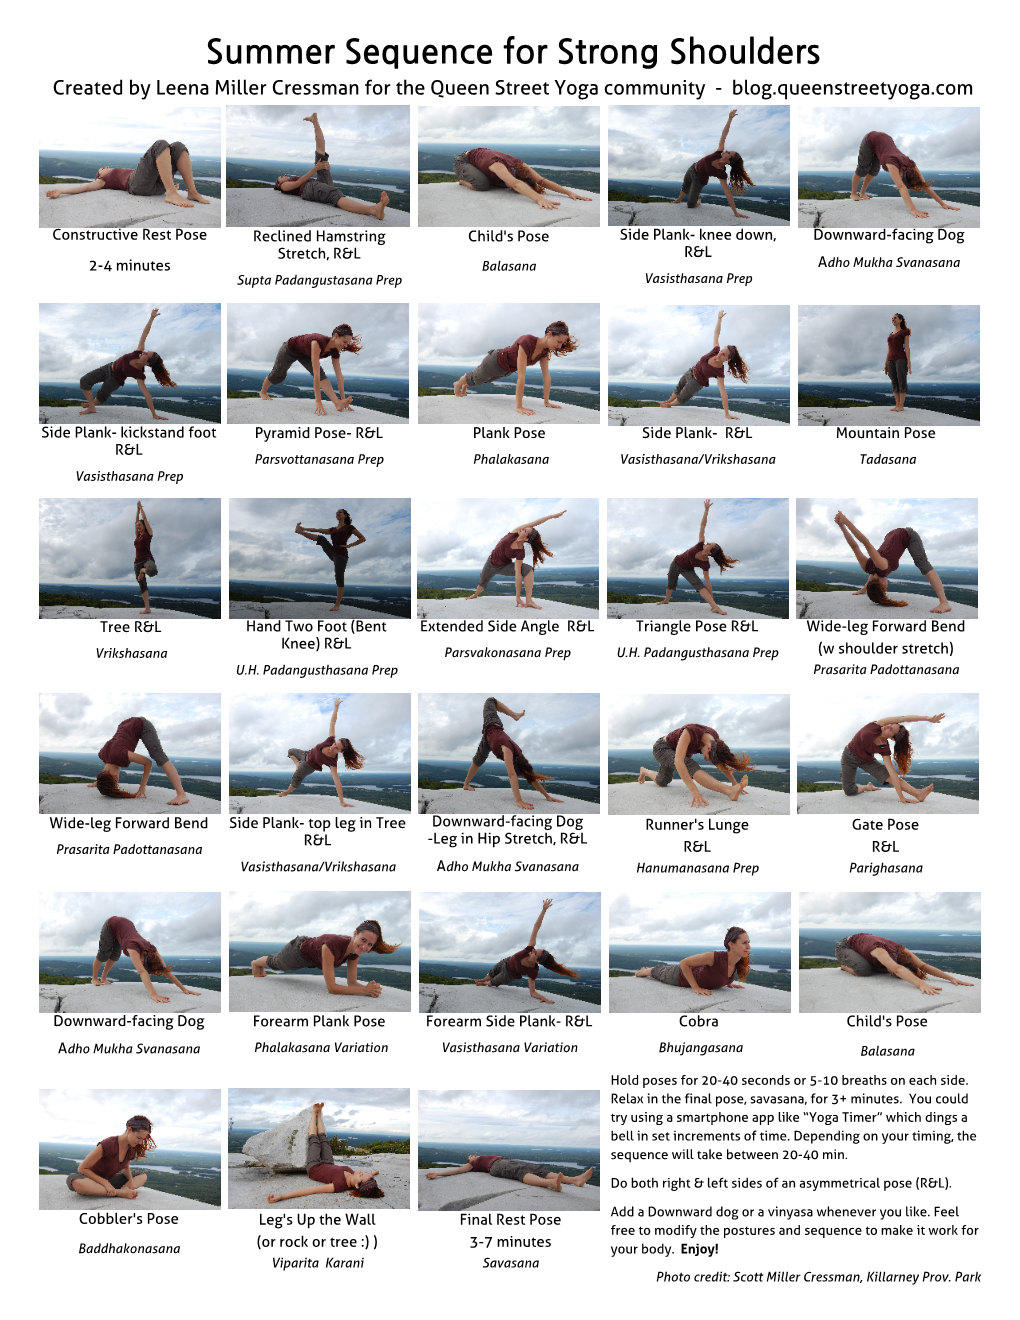 Summer Sequence for Strong Shoulders Created by Leena Miller Cressman for the Queen Street Yoga Community - Blog.Queenstreetyoga.Com